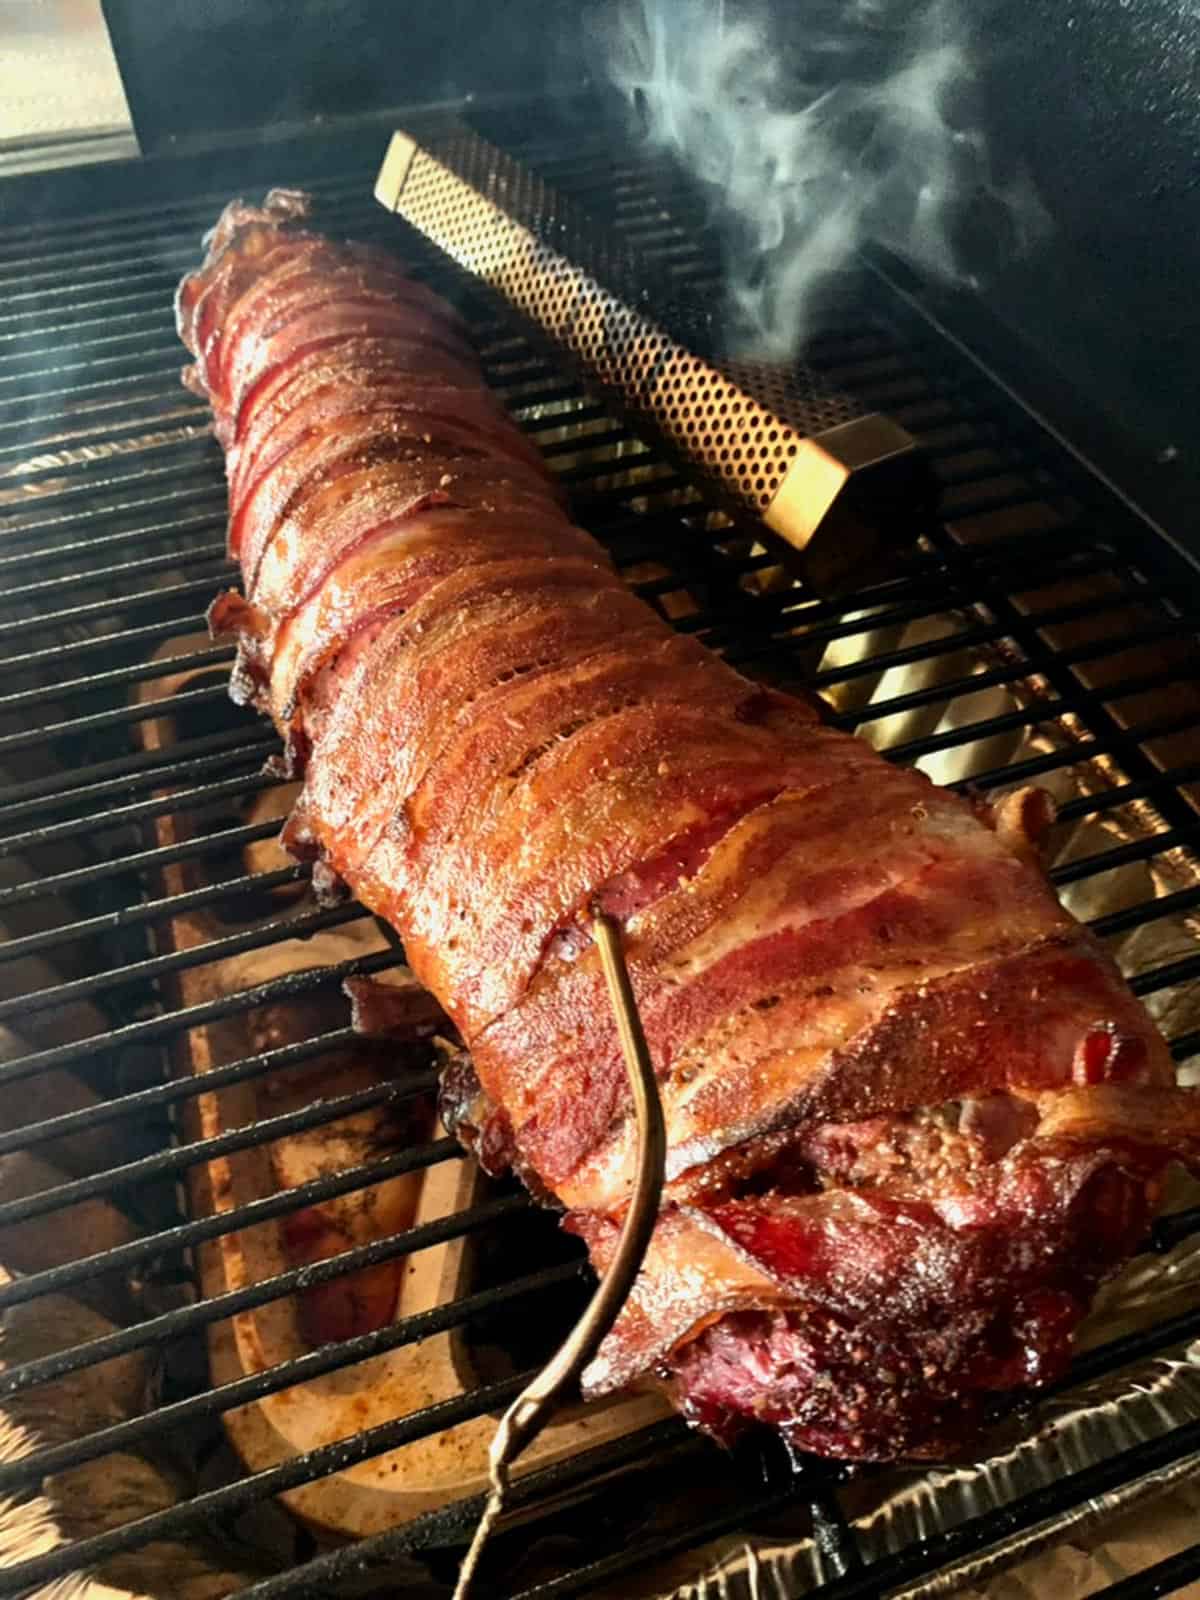 A hunk of meat on a smoker.